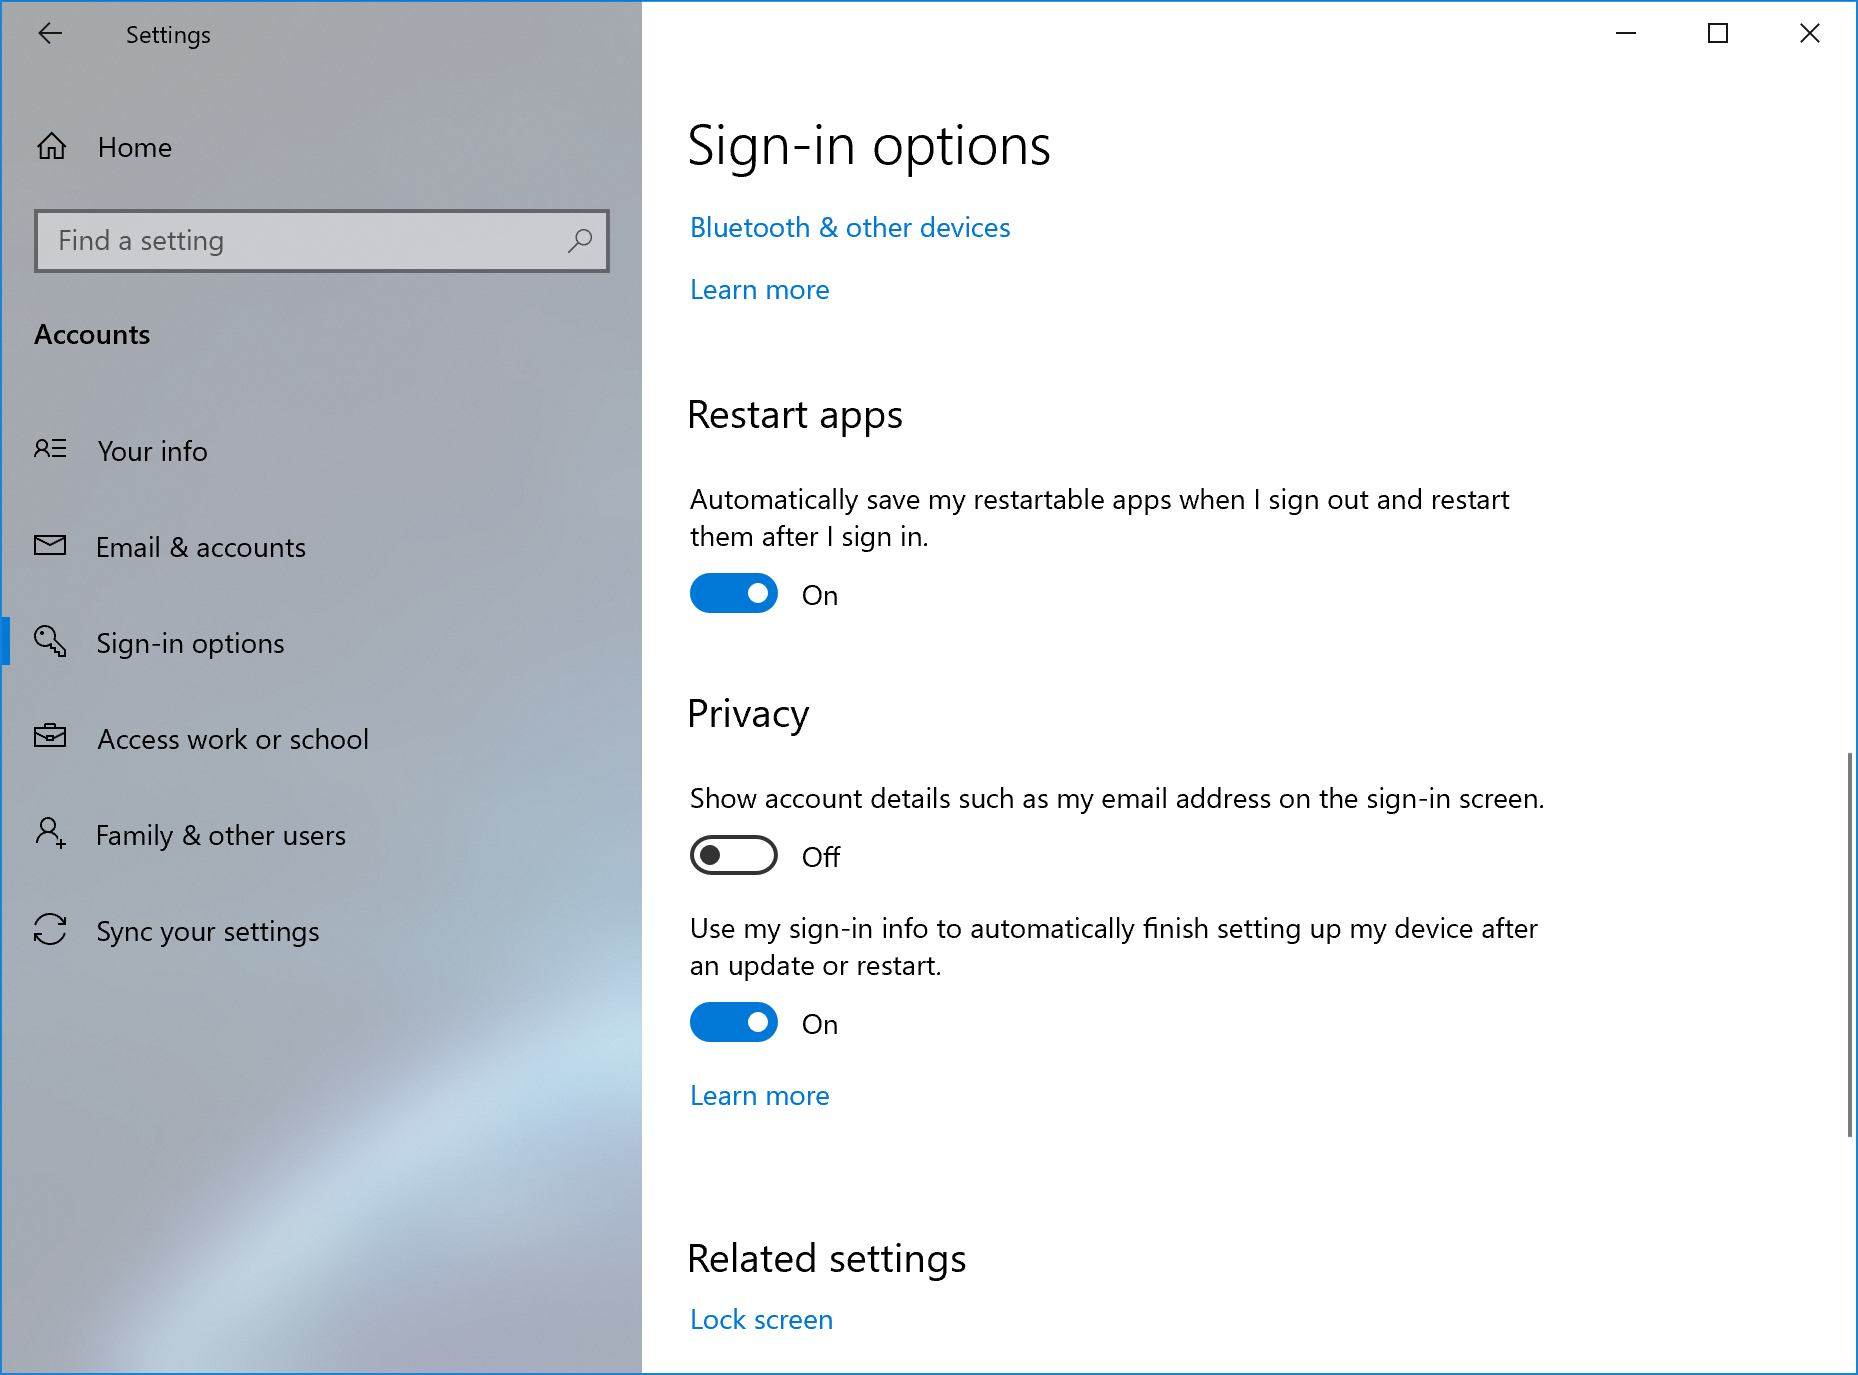 Control over restarting apps at sign-in.